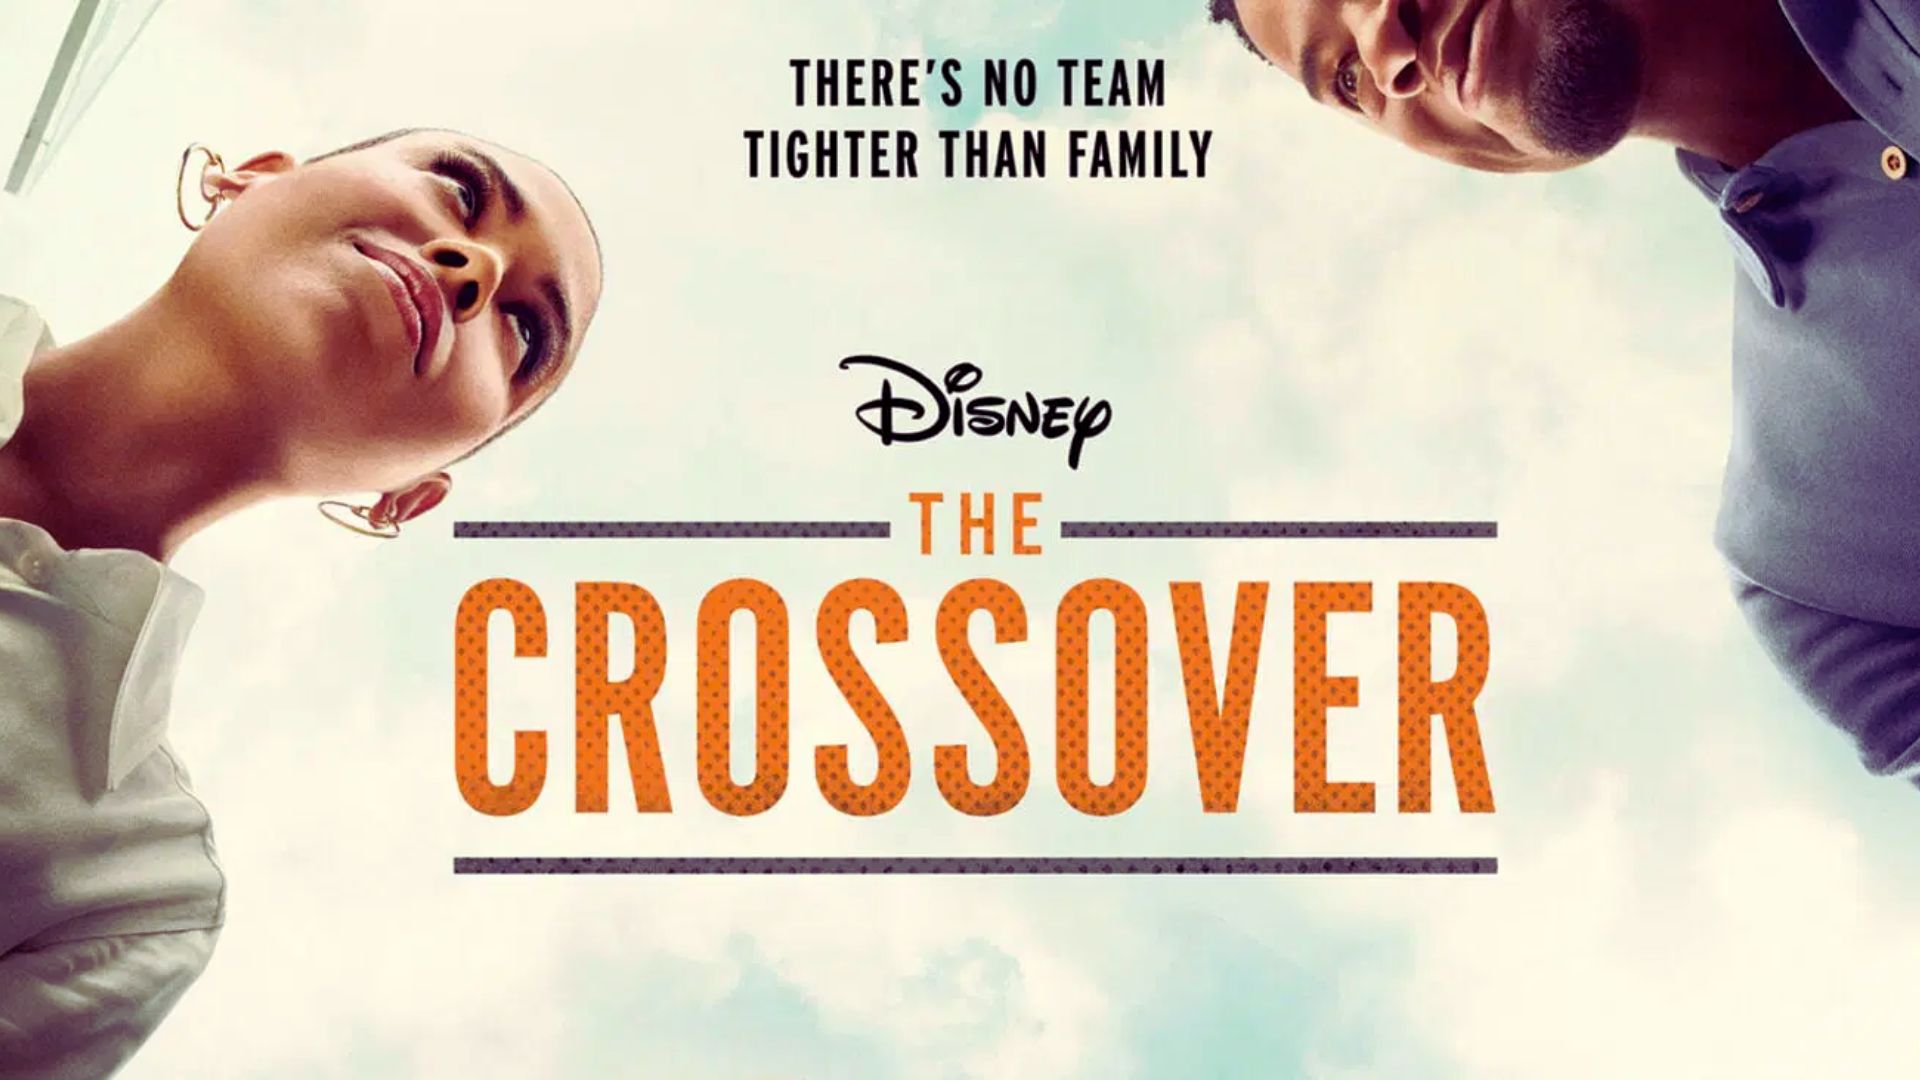 How to Watch The Crossover Movie Online For Free?